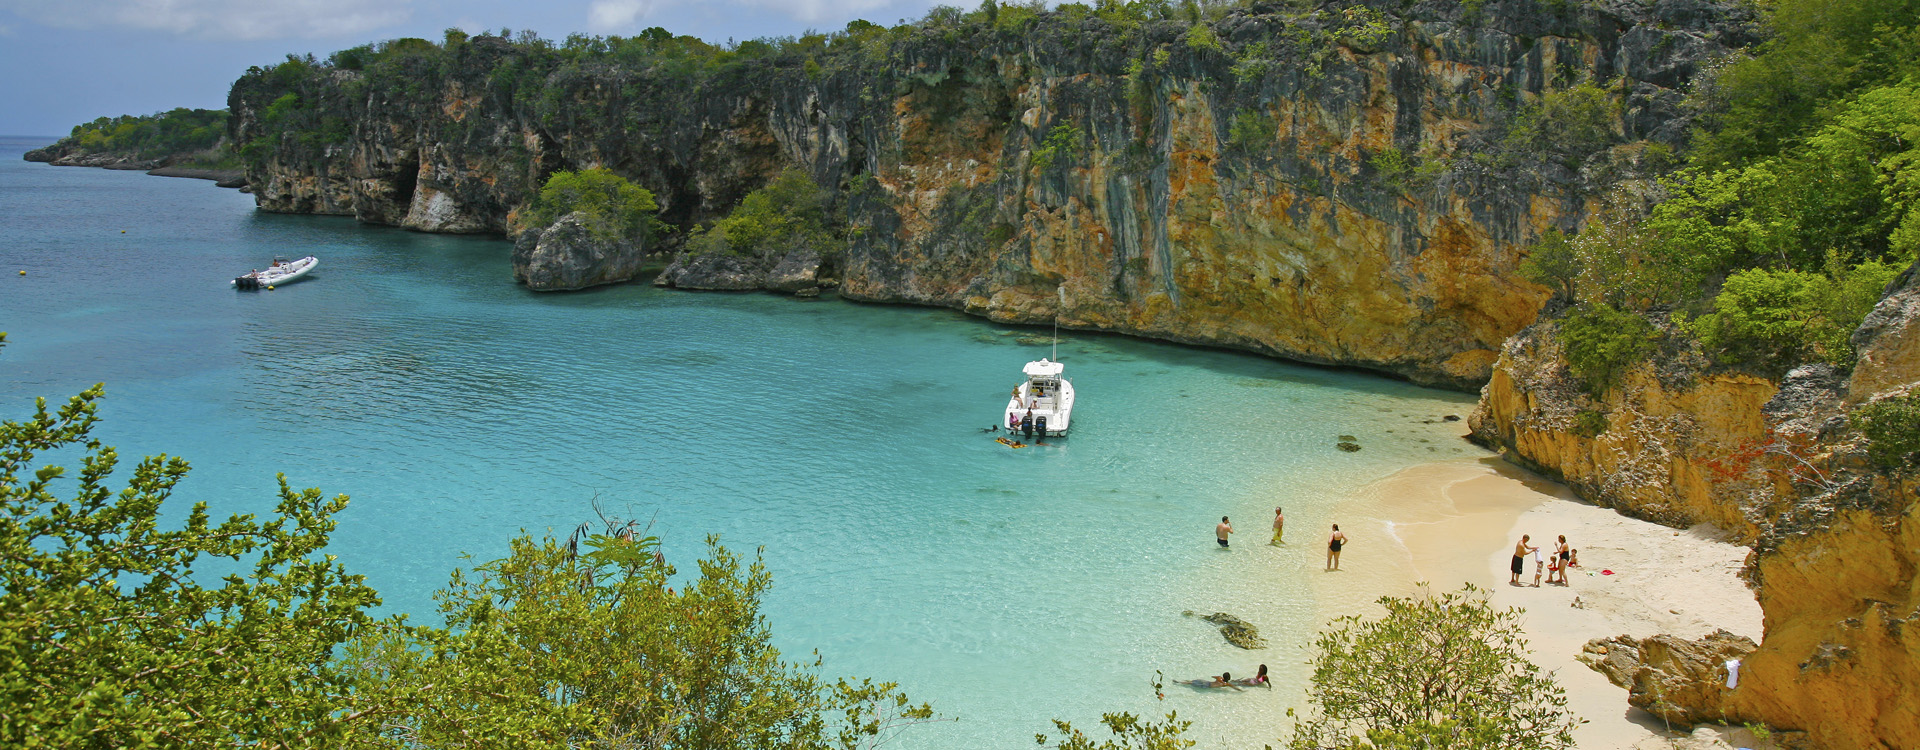 Little Bay, is a favorite beach on Anguilla.   